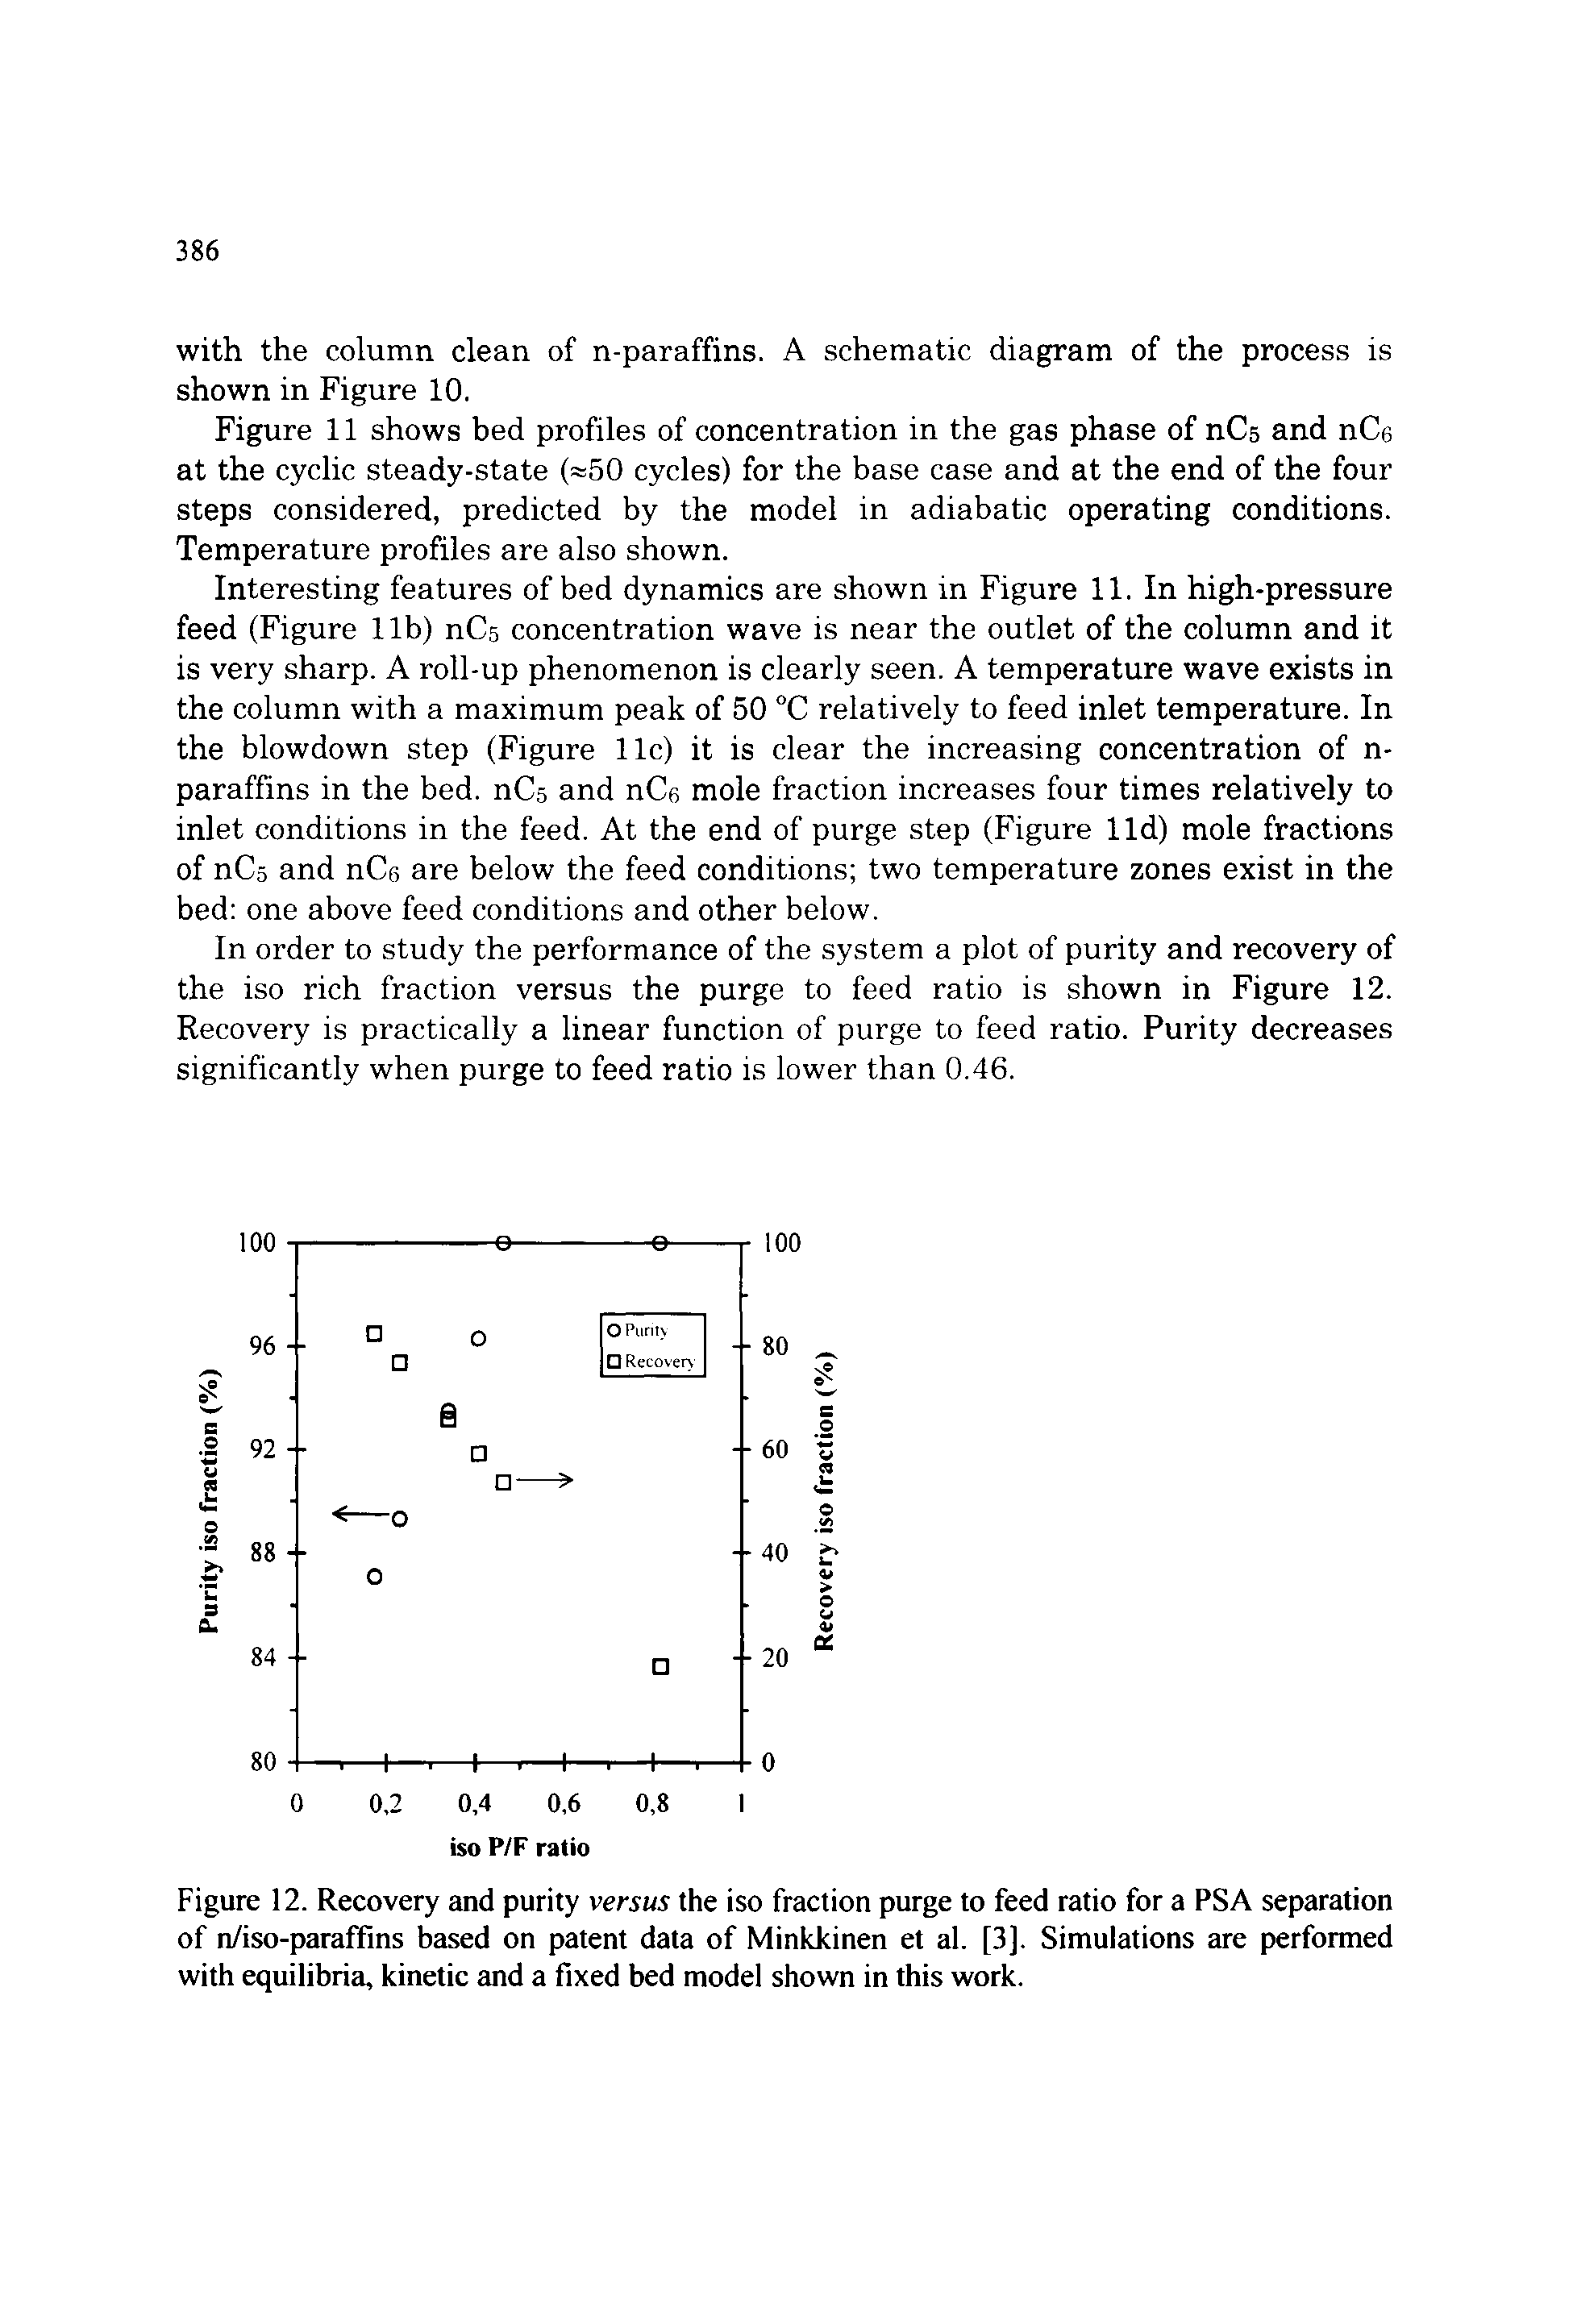 Figure 12. Recovery and purity versus the iso fraction purge to feed ratio for a PSA separation of n/iso-paraffins based on patent data of Minkkinen et al. [3]. Simulations are performed with equilibria, kinetic and a fixed bed model shown in this work.